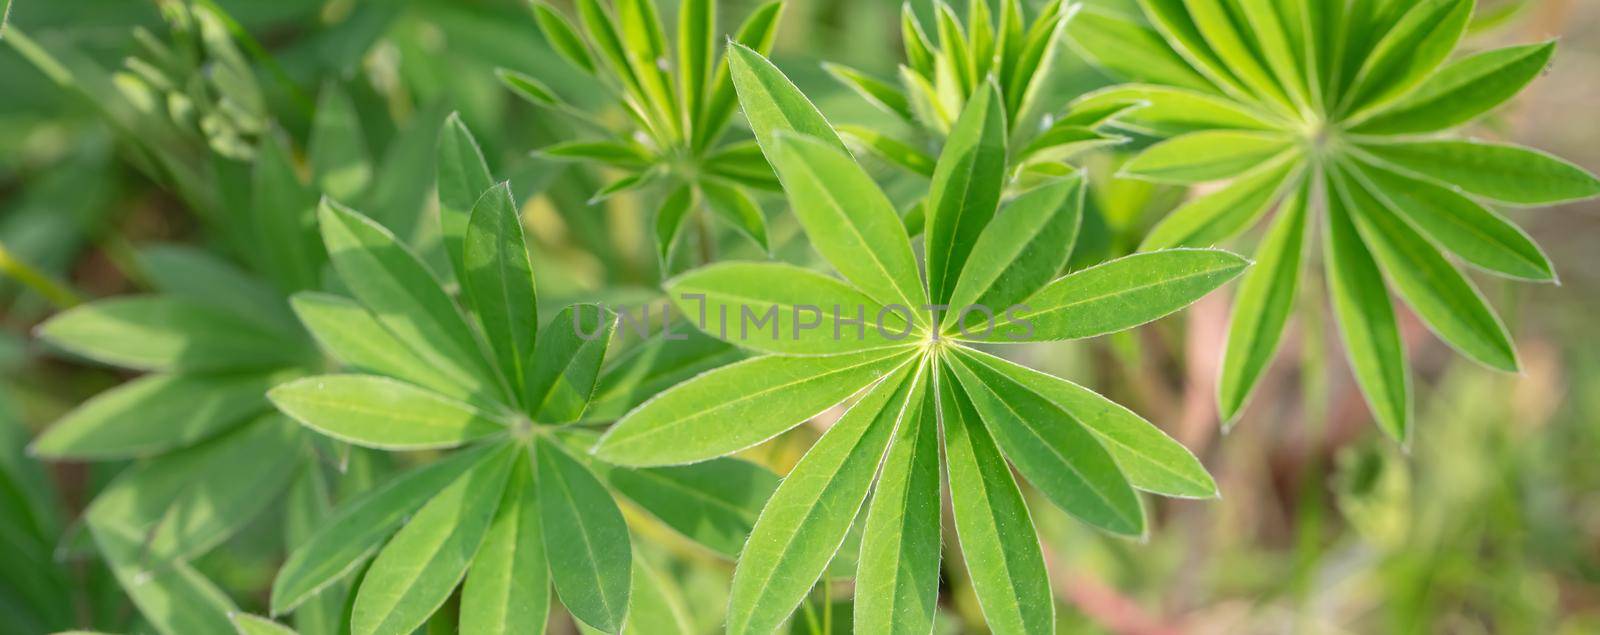 Beautiful green leafed plants. Banner green floral background. by Sviatlana